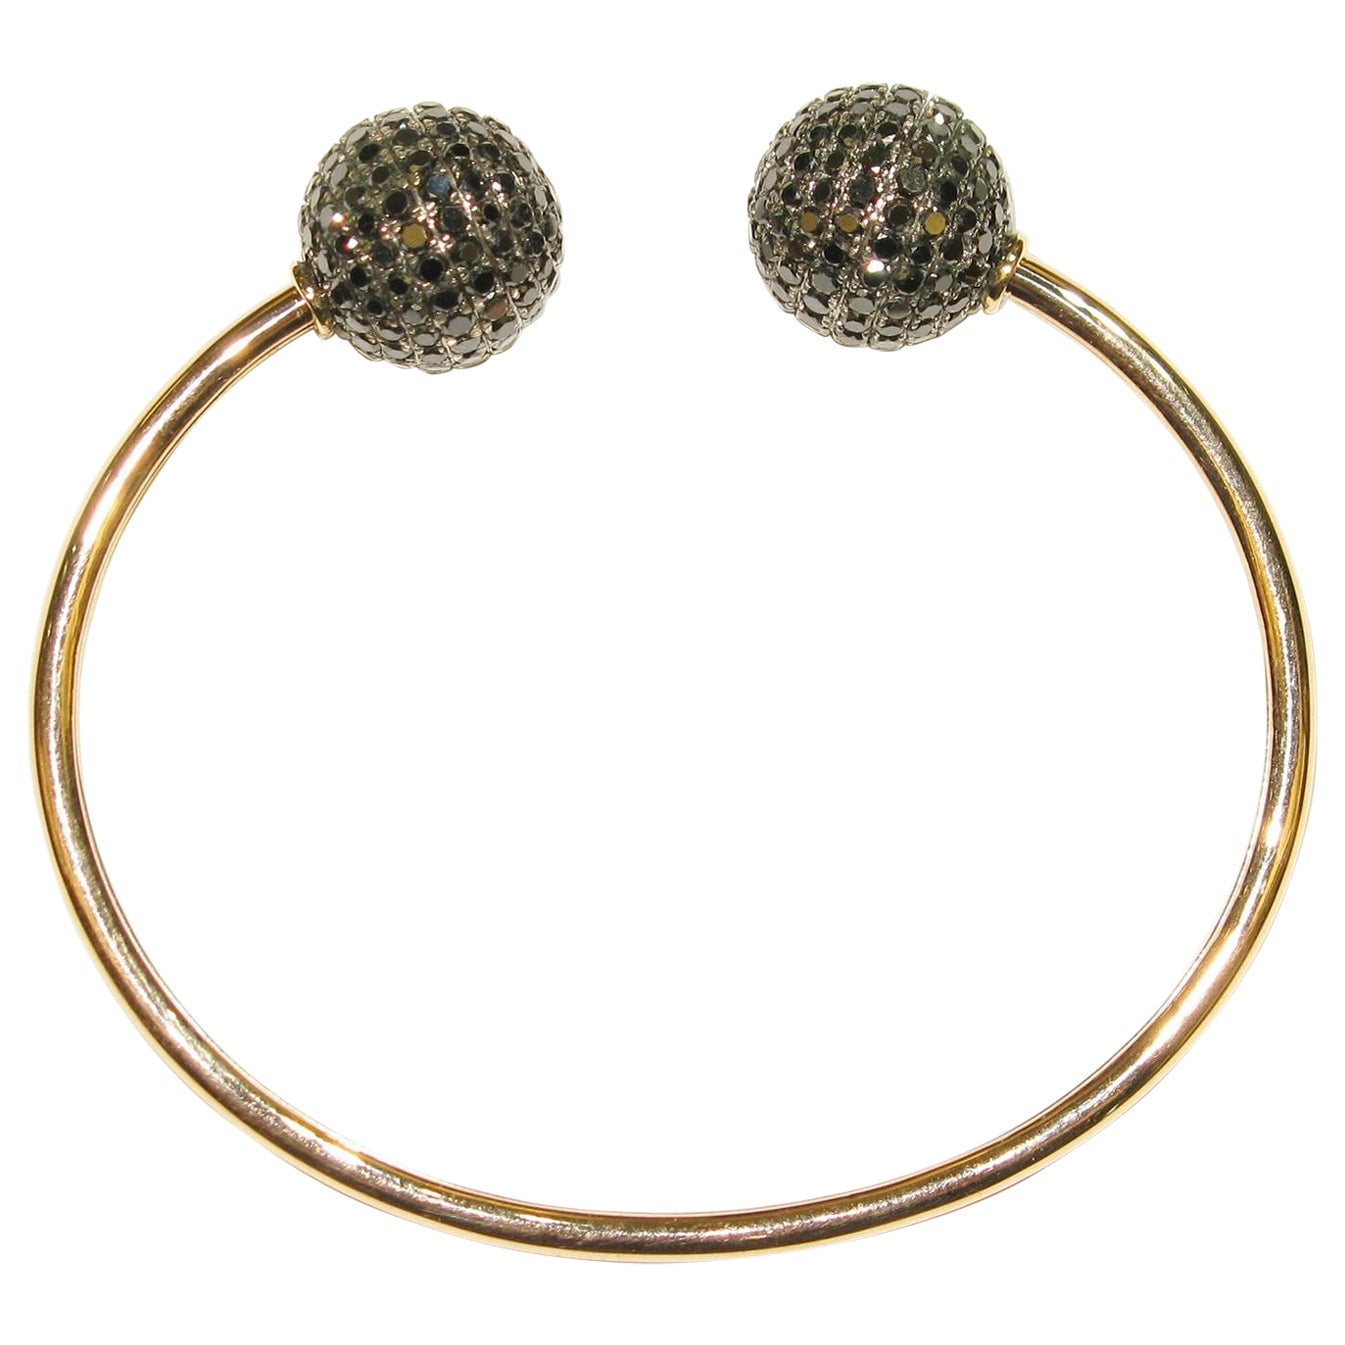 Pave Diamond Ball Flexible Cuff Made In 18k Gold & Silver For Sale